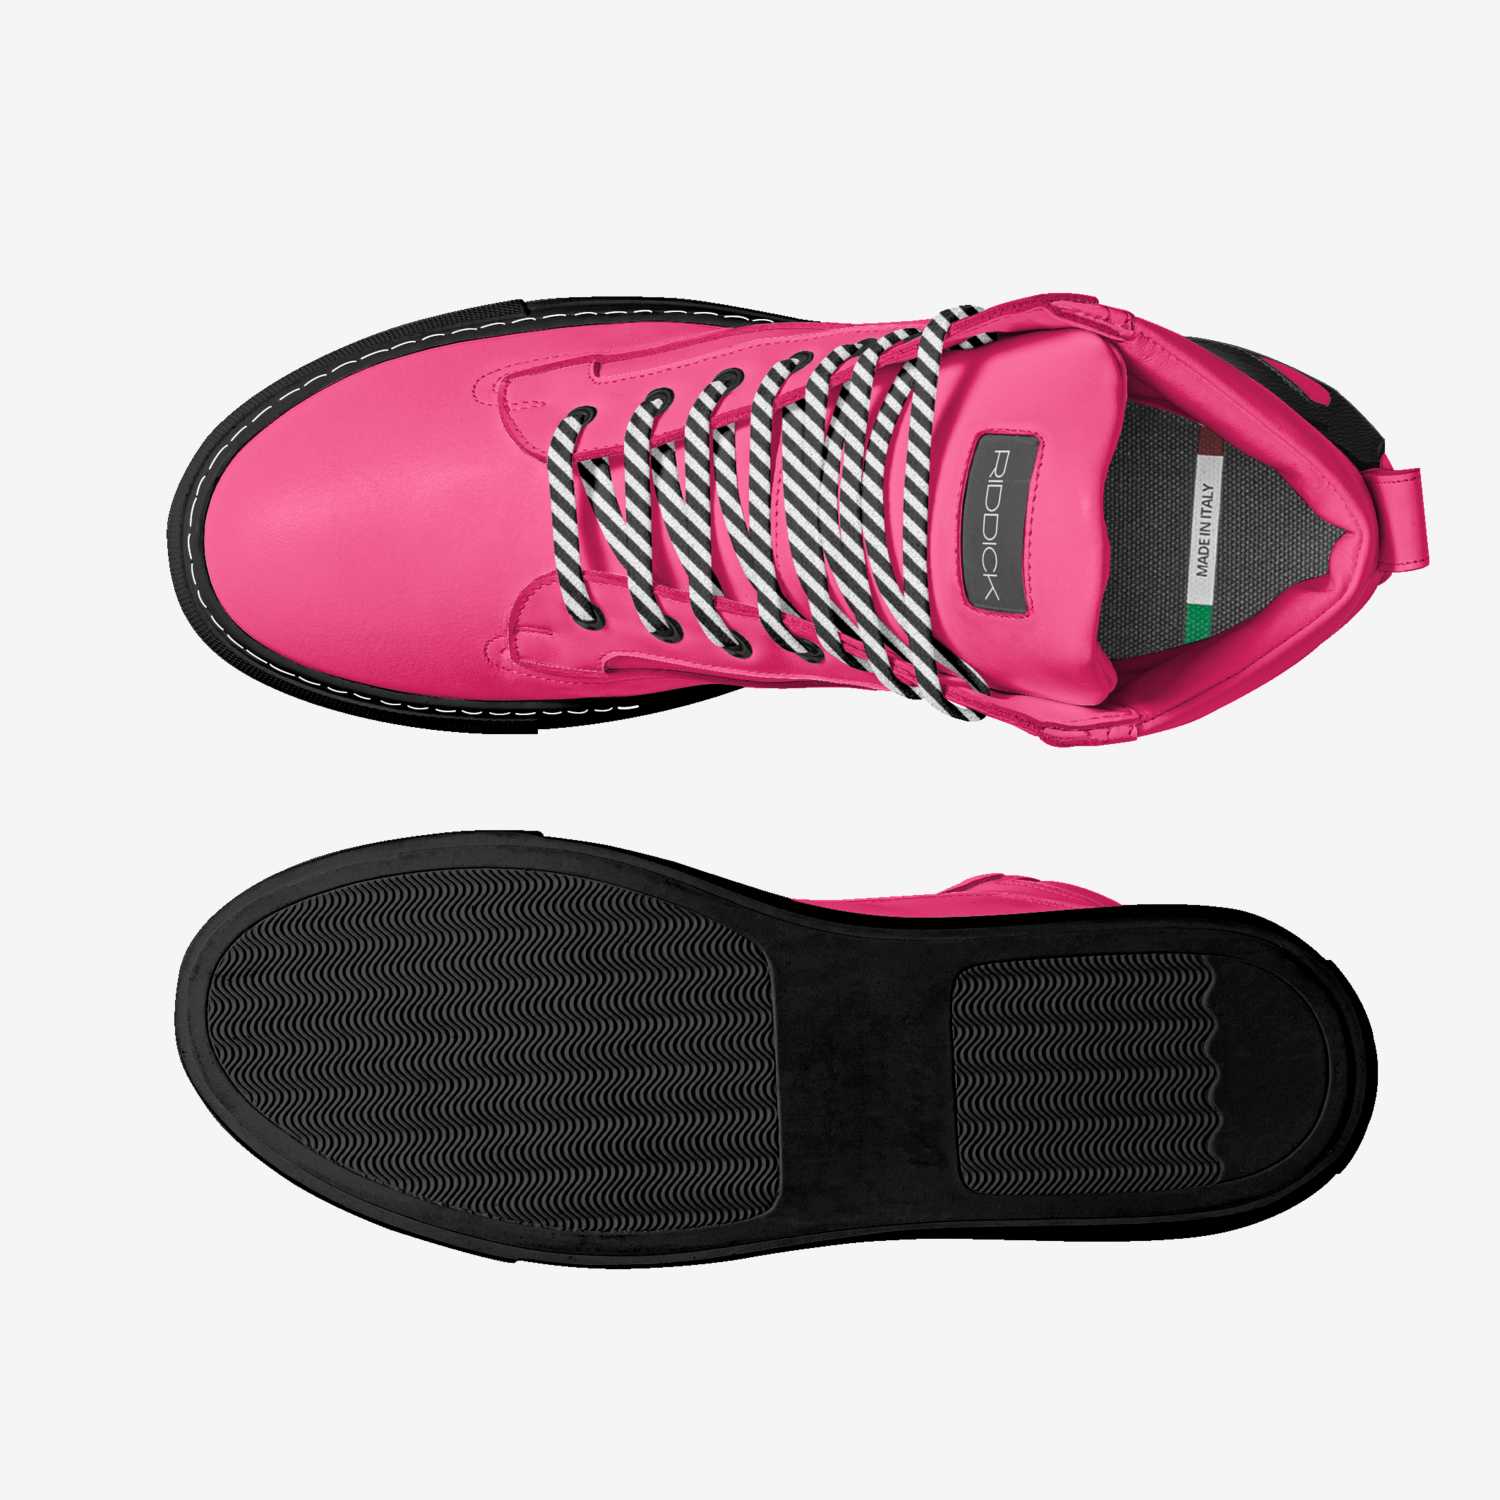 O.G. RIDDICK [Pink Silicon] - Riddick Shoes Shoe Riddick Shoes   